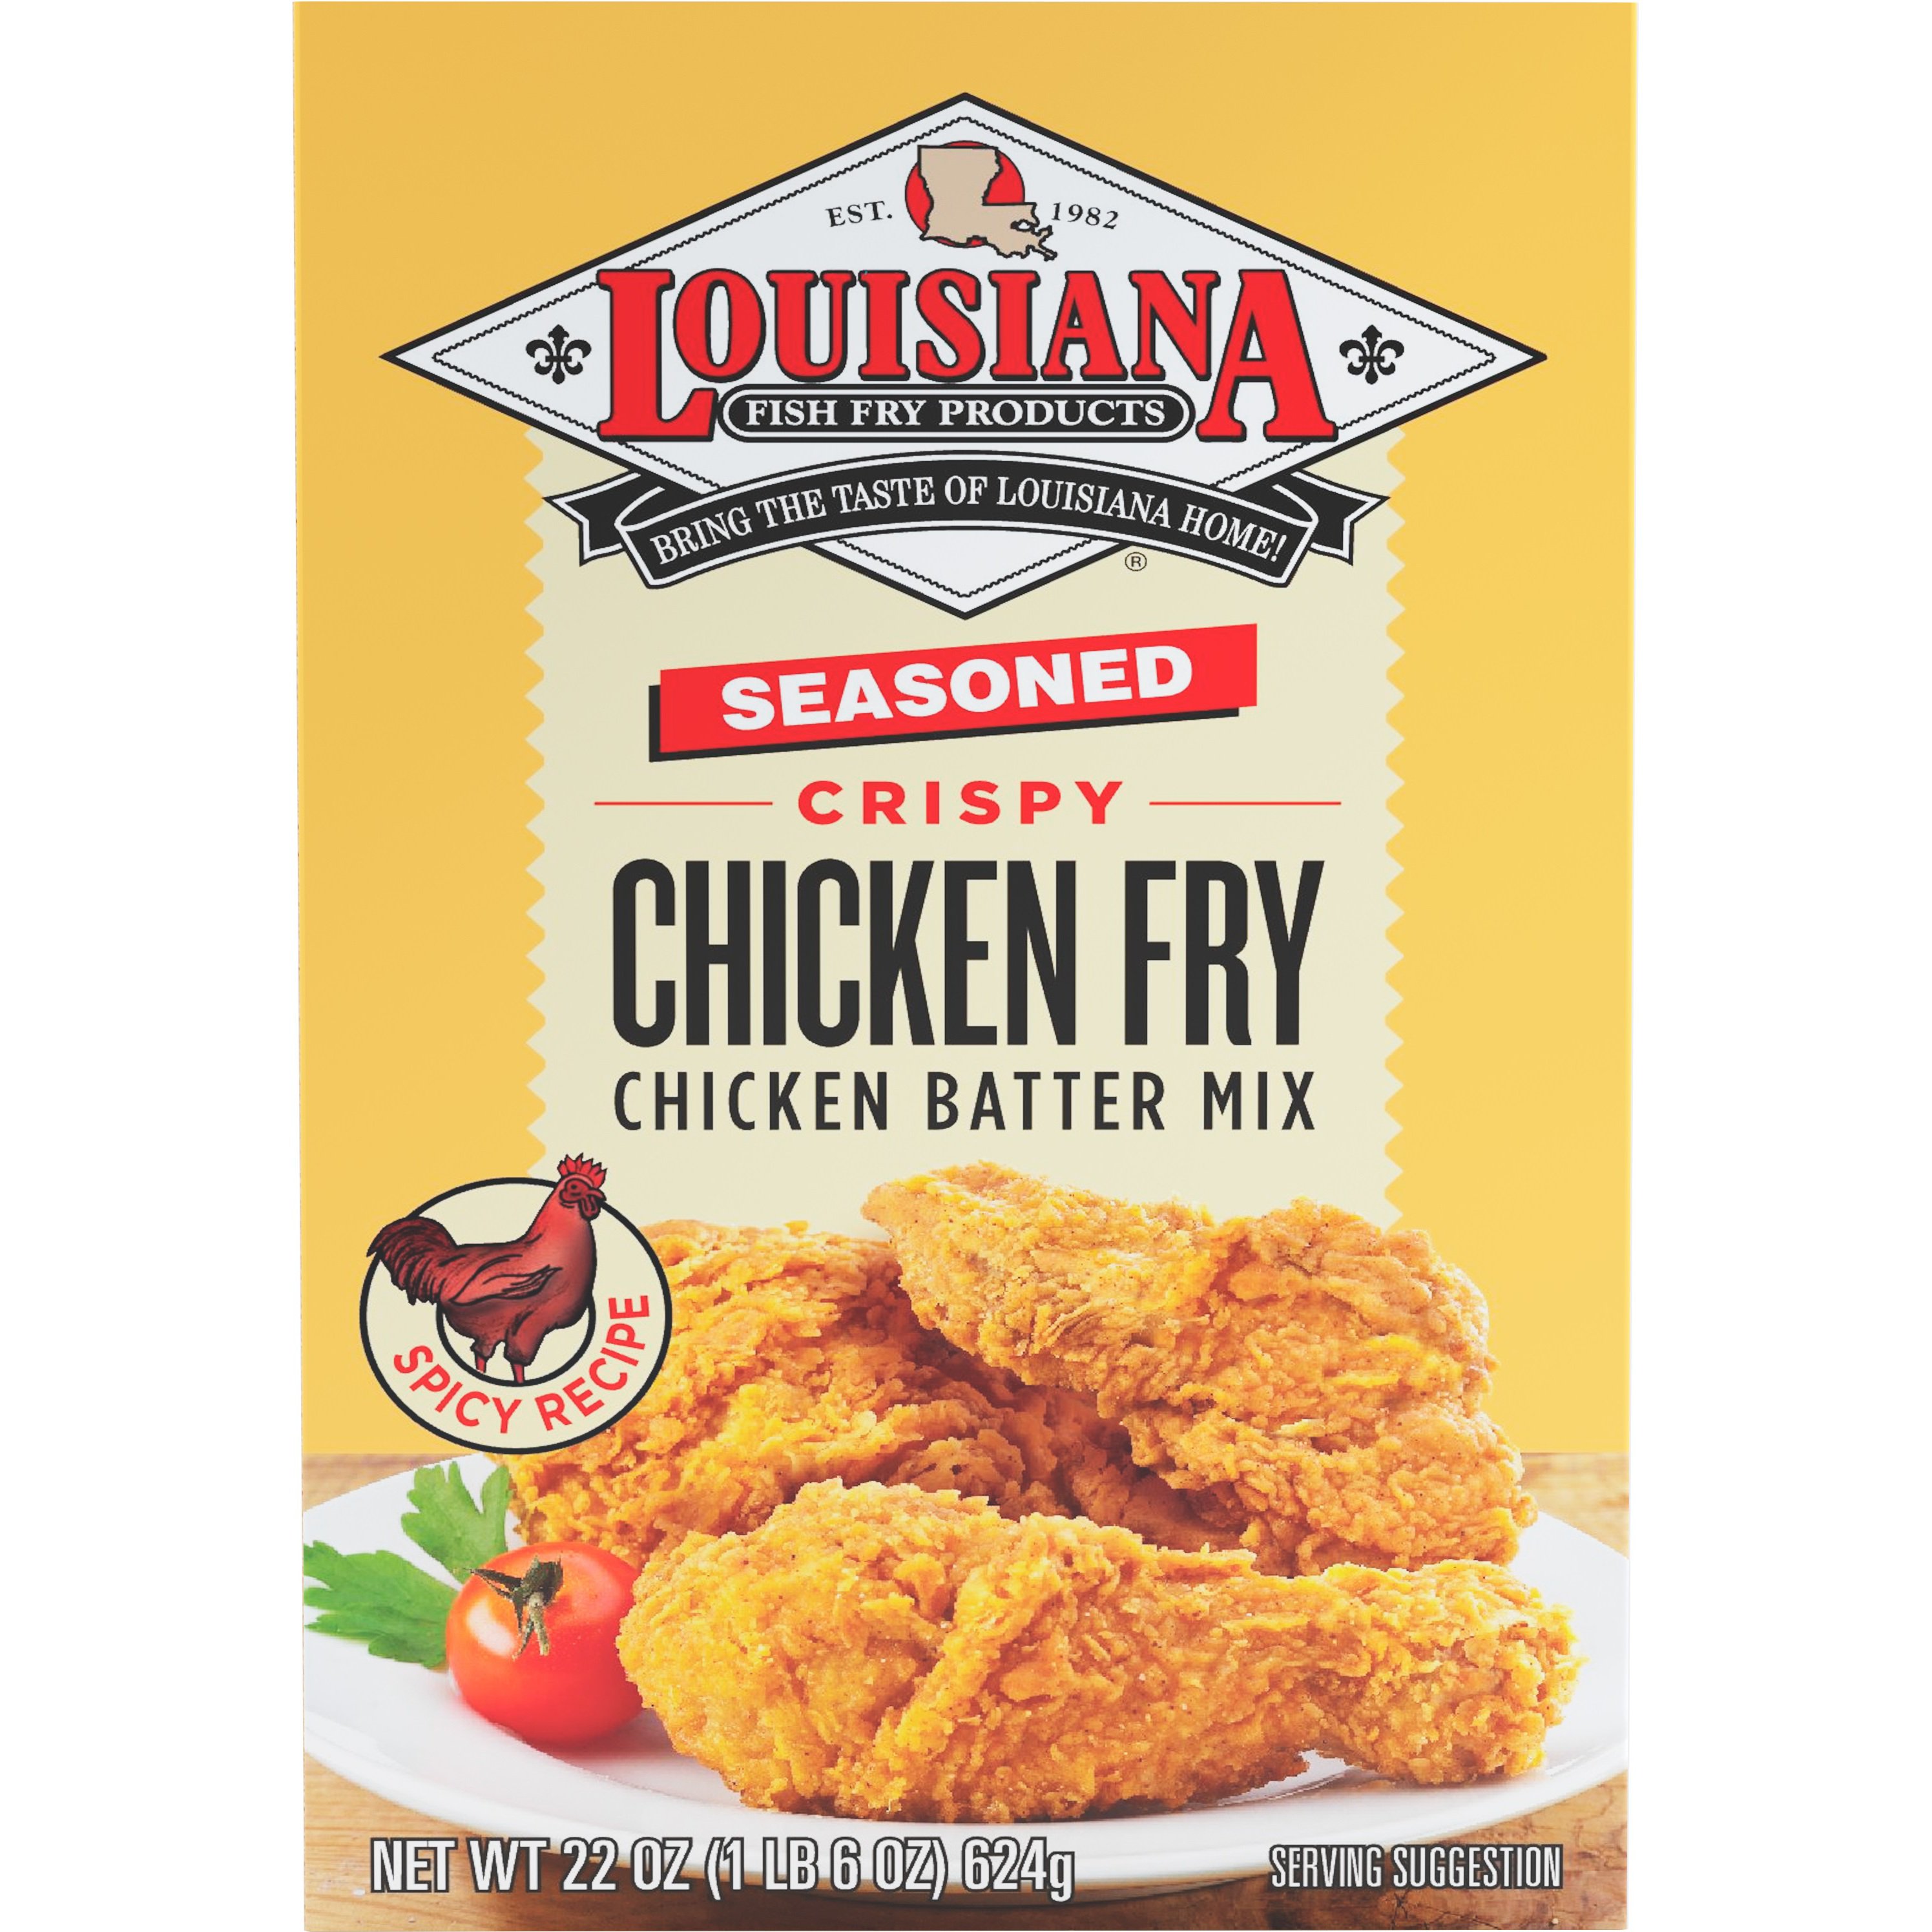 Seasoning : Flavorful and Crispy Coating for Fried Foods